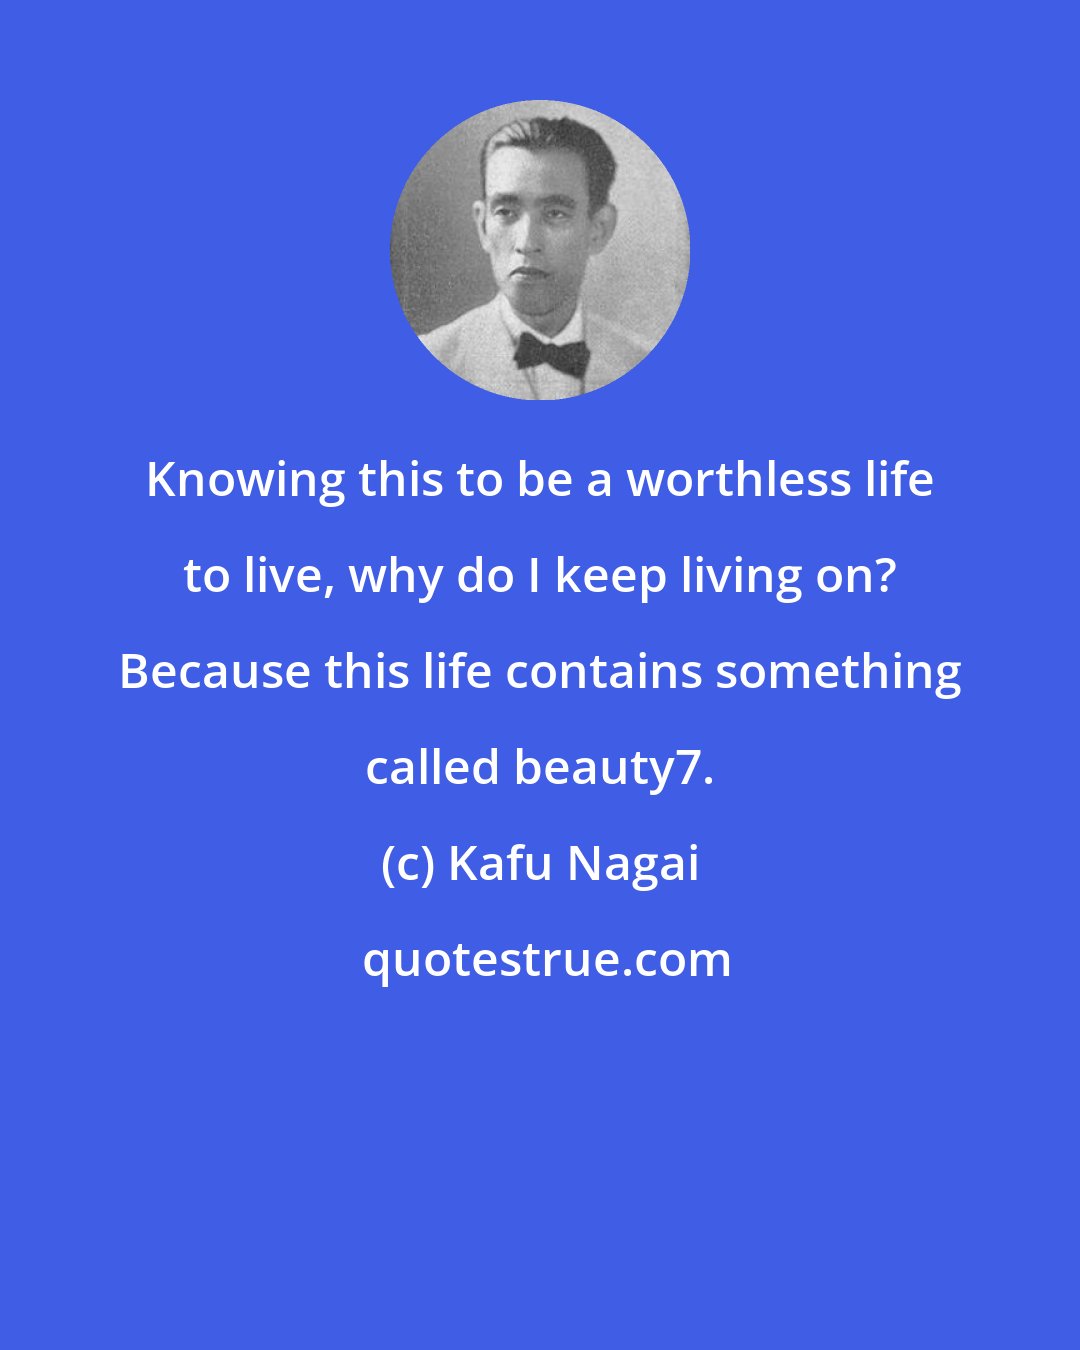 Kafu Nagai: Knowing this to be a worthless life to live, why do I keep living on? Because this life contains something called beauty7.